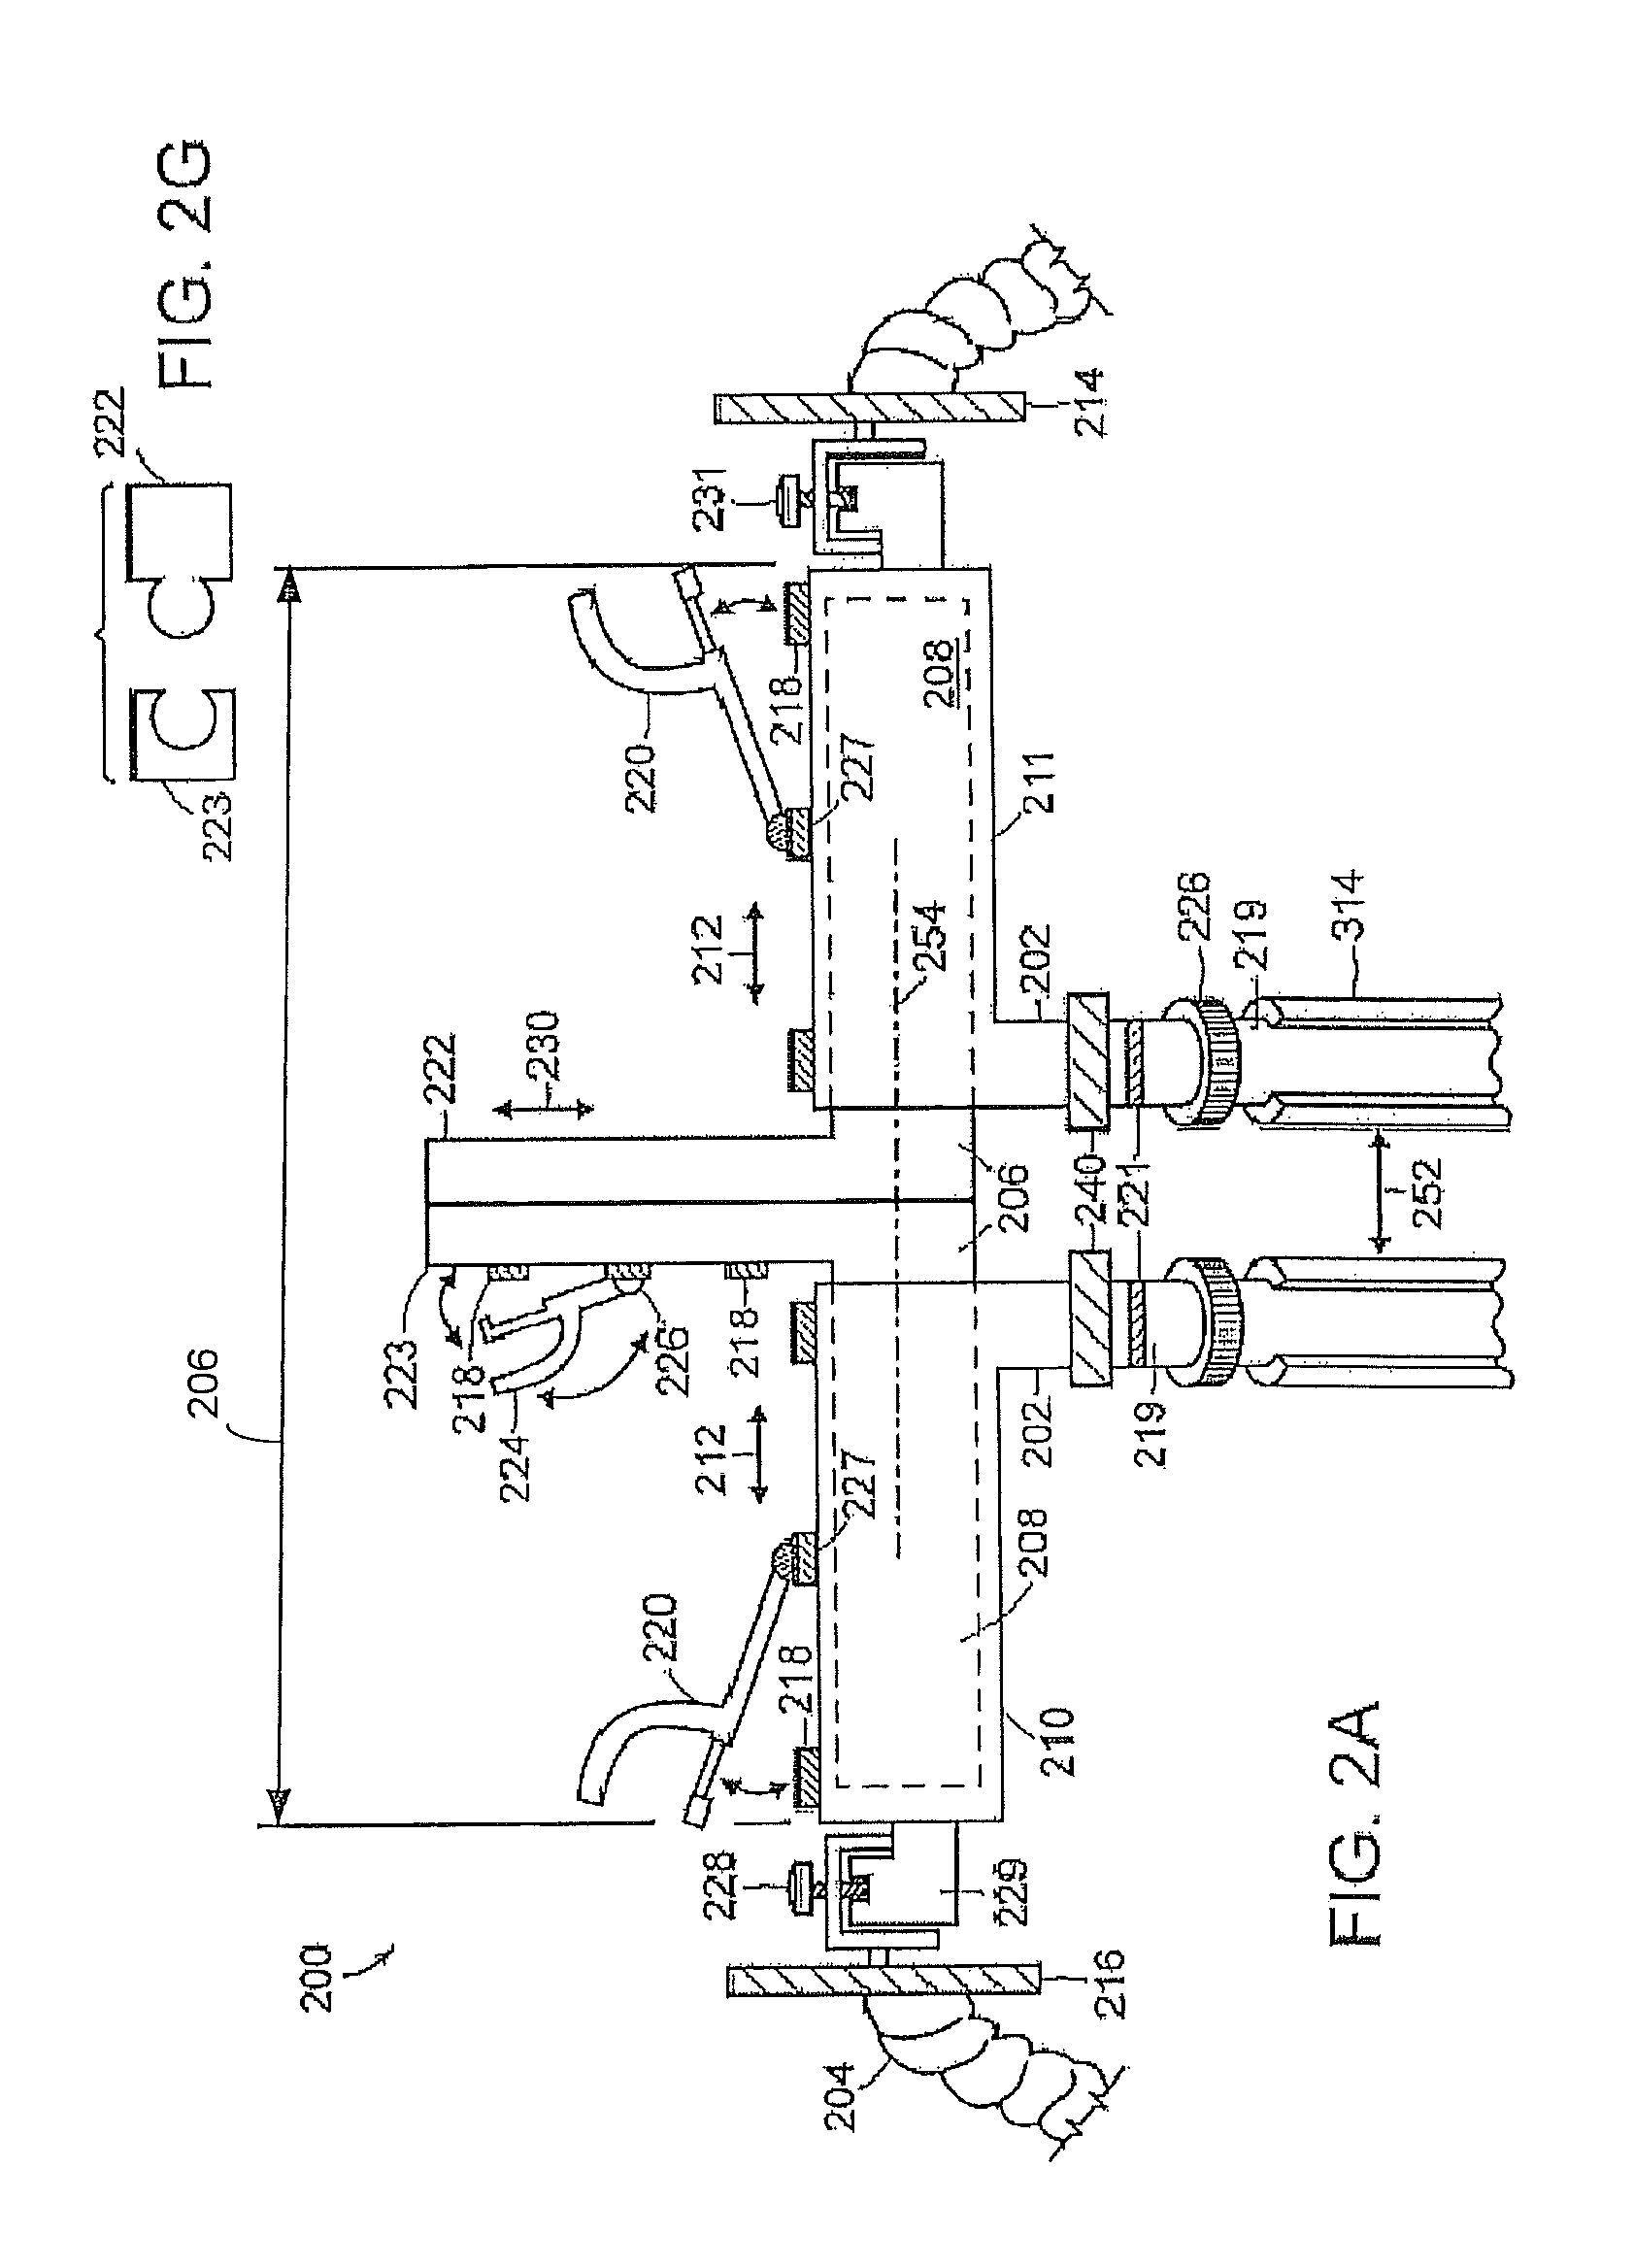 Surgical base unit and retractor support mechanism